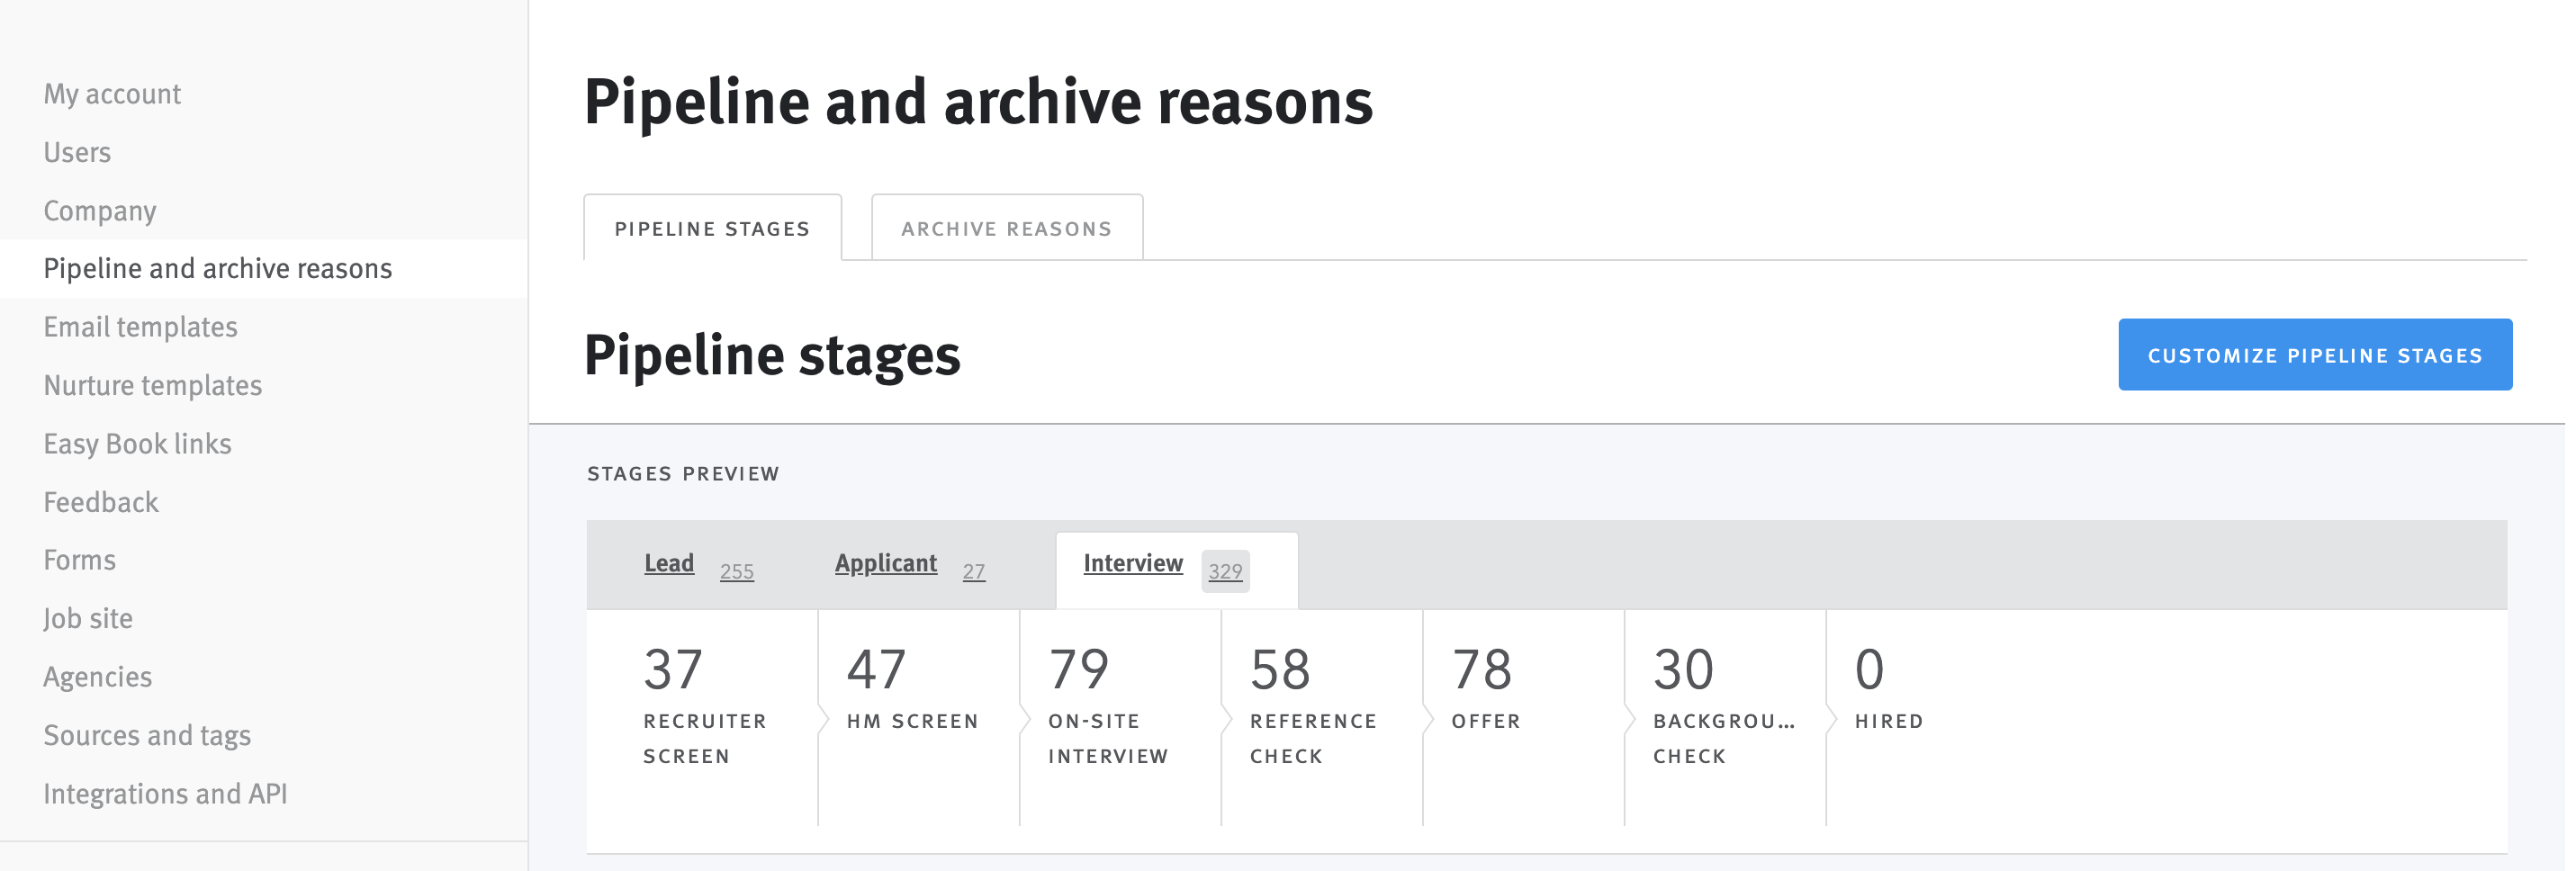 Pipeline and archive reasons settings page.